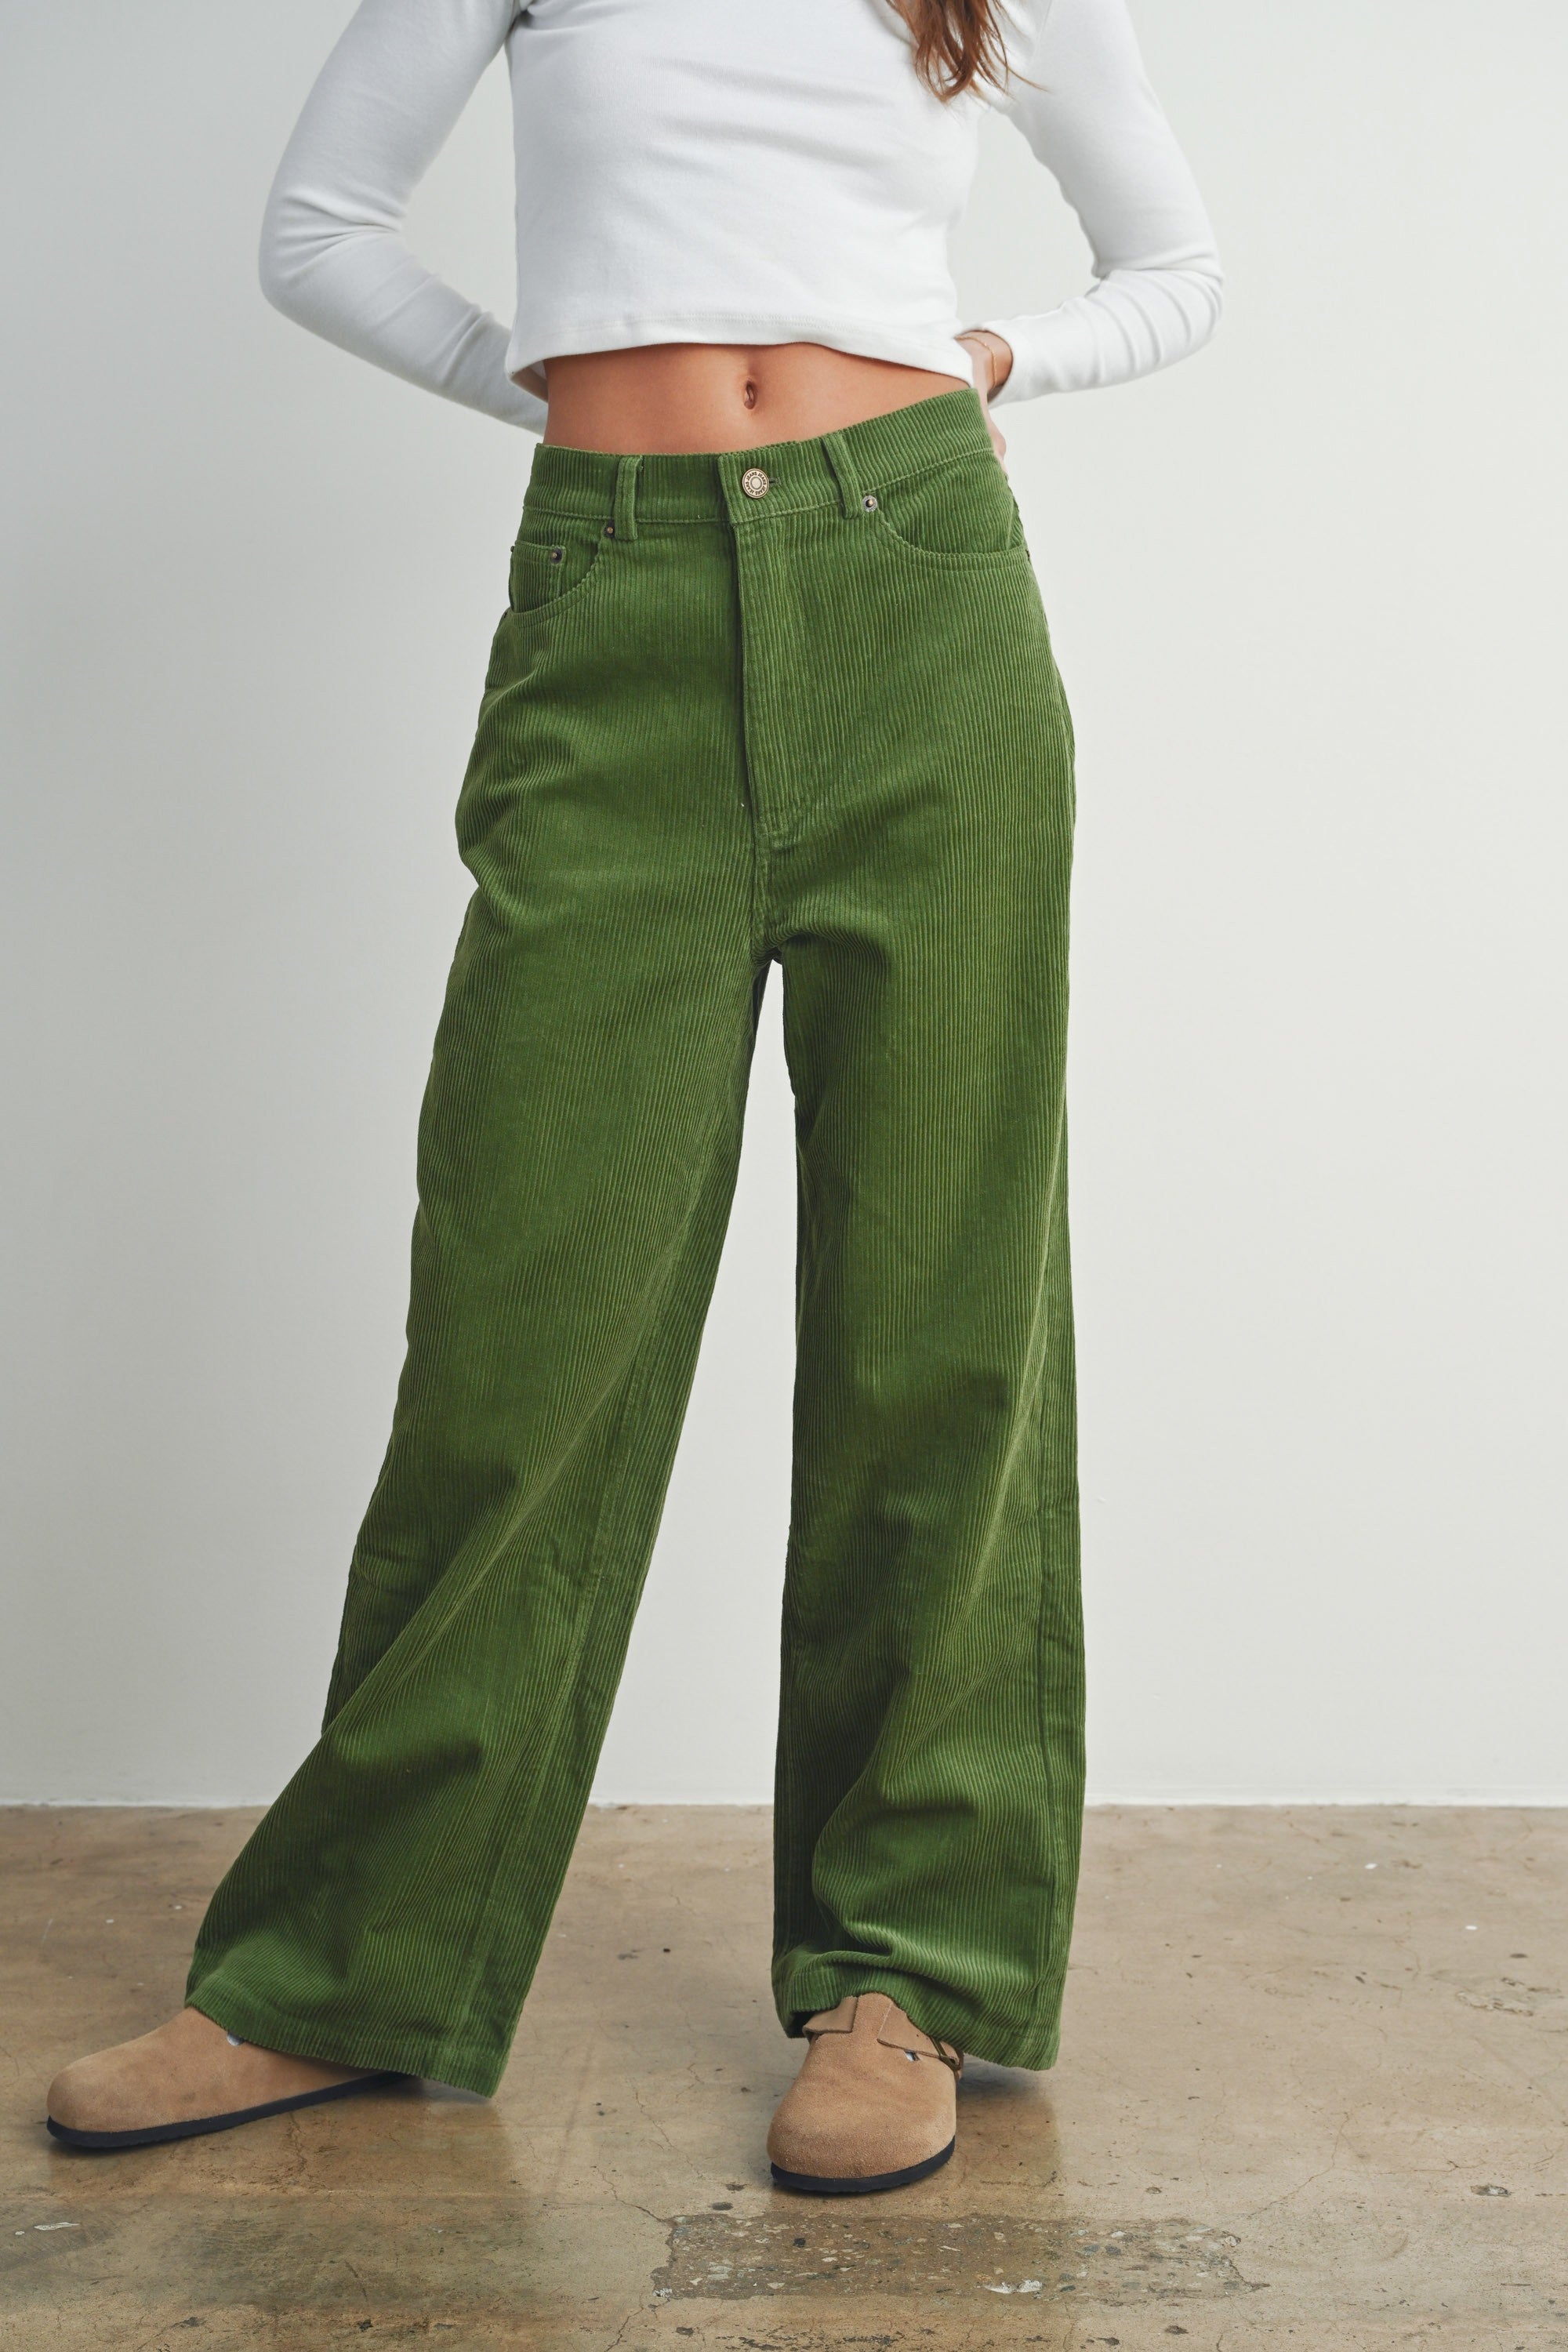 Green Corduroy Pants - Out of the Blue